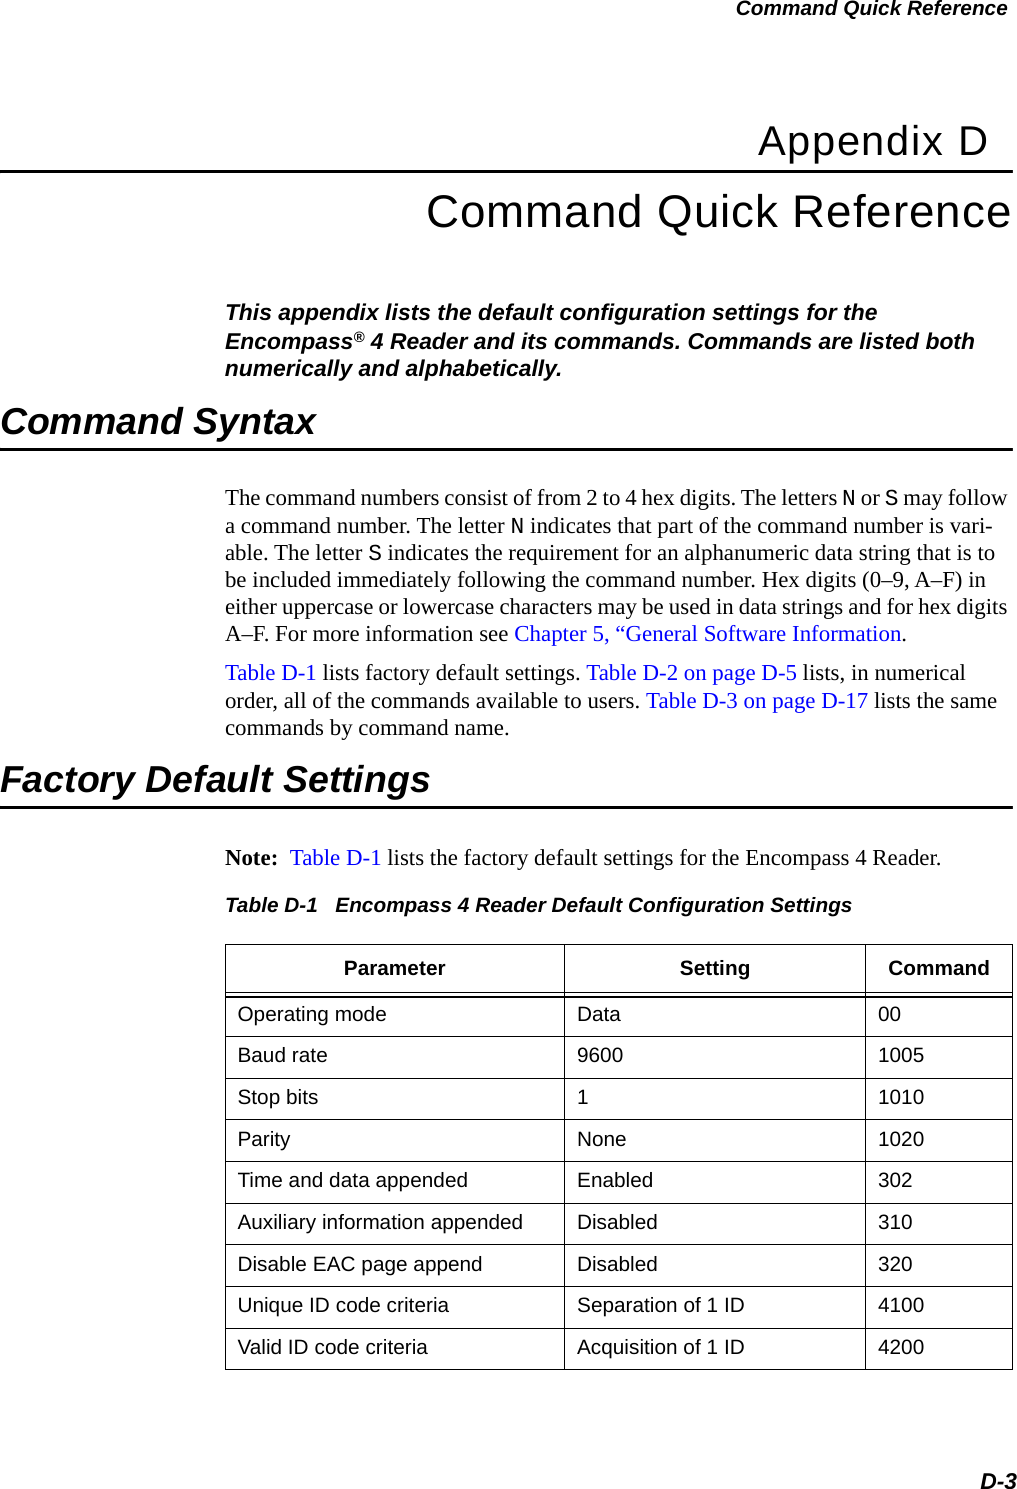 Command Quick ReferenceD-3Appendix DCommand Quick ReferenceThis appendix lists the default configuration settings for the Encompass® 4 Reader and its commands. Commands are listed both numerically and alphabetically.Command SyntaxThe command numbers consist of from 2 to 4 hex digits. The letters N or S may follow a command number. The letter N indicates that part of the command number is vari-able. The letter S indicates the requirement for an alphanumeric data string that is to be included immediately following the command number. Hex digits (0–9, A–F) in either uppercase or lowercase characters may be used in data strings and for hex digits A–F. For more information see Chapter 5, “General Software Information.Table D-1 lists factory default settings. Table D-2 on page D-5 lists, in numerical order, all of the commands available to users. Table D-3 on page D-17 lists the same commands by command name.Factory Default SettingsNote:  Table D-1 lists the factory default settings for the Encompass 4 Reader.Table D-1   Encompass 4 Reader Default Configuration Settings Parameter Setting CommandOperating mode Data 00Baud rate 9600 1005Stop bits 11010Parity None 1020Time and data appended Enabled 302Auxiliary information appended Disabled 310Disable EAC page append Disabled 320Unique ID code criteria Separation of 1 ID 4100Valid ID code criteria Acquisition of 1 ID 4200